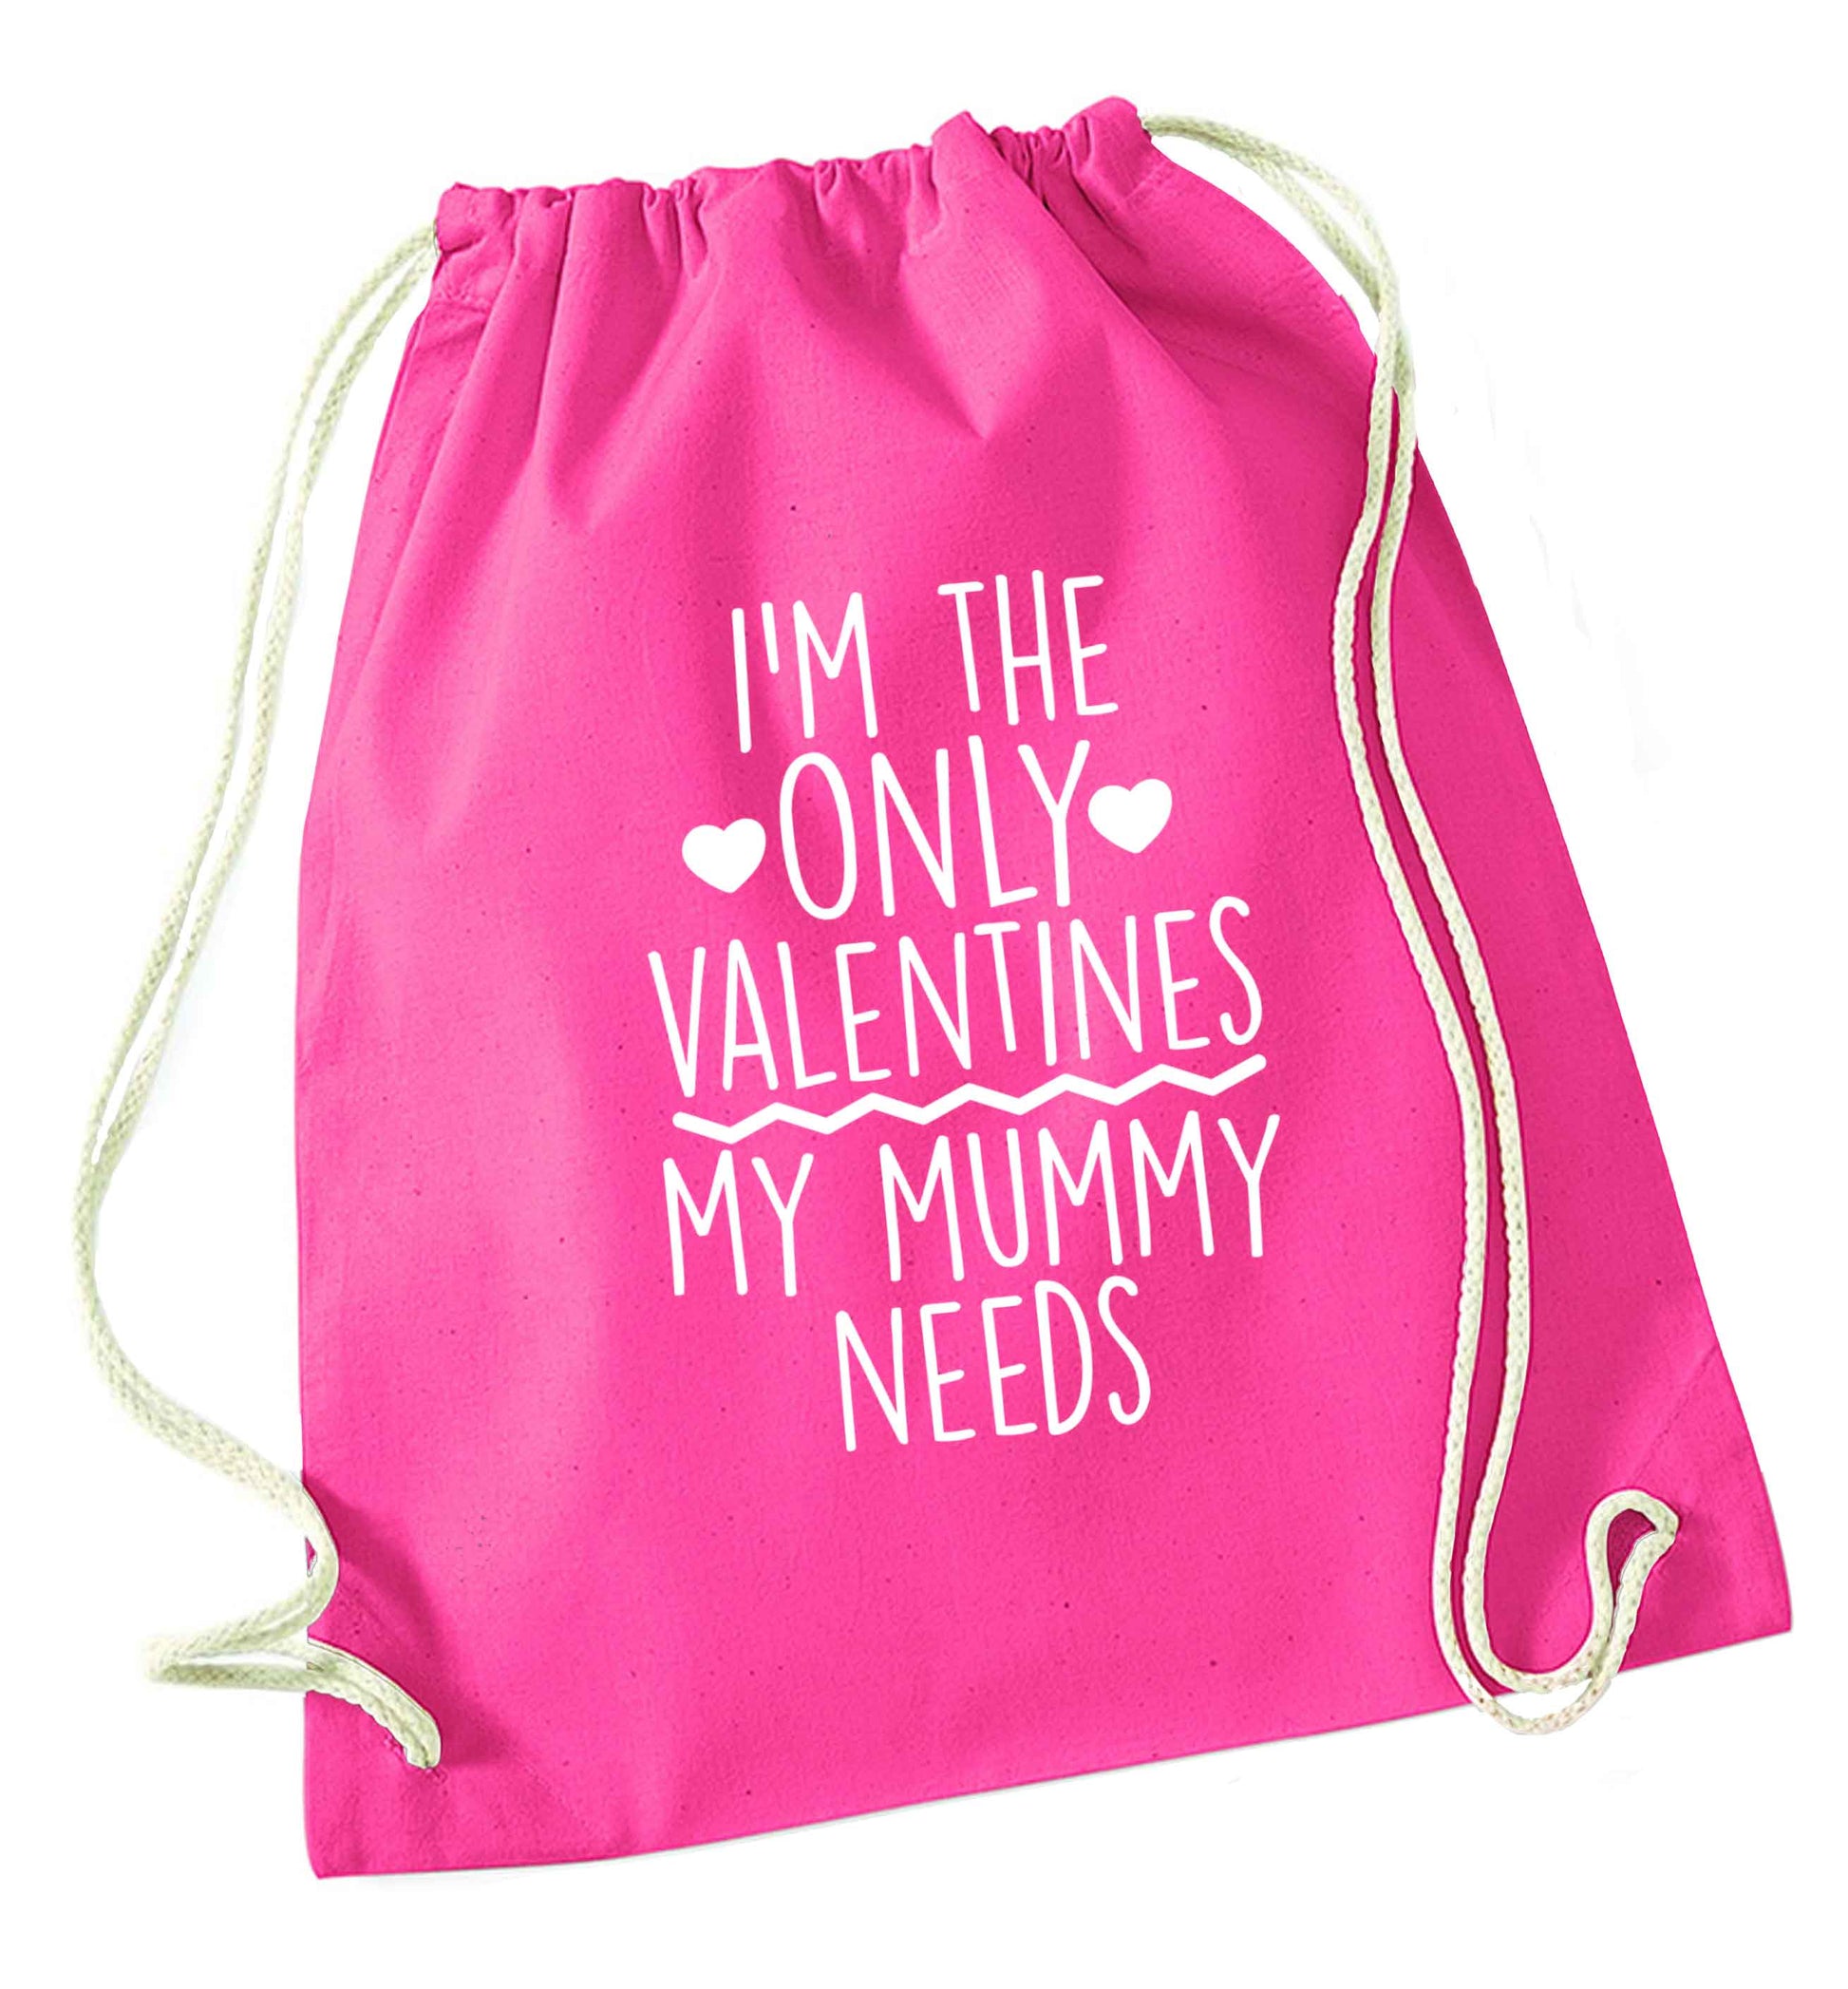 I'm the only valentines my mummy needs pink drawstring bag